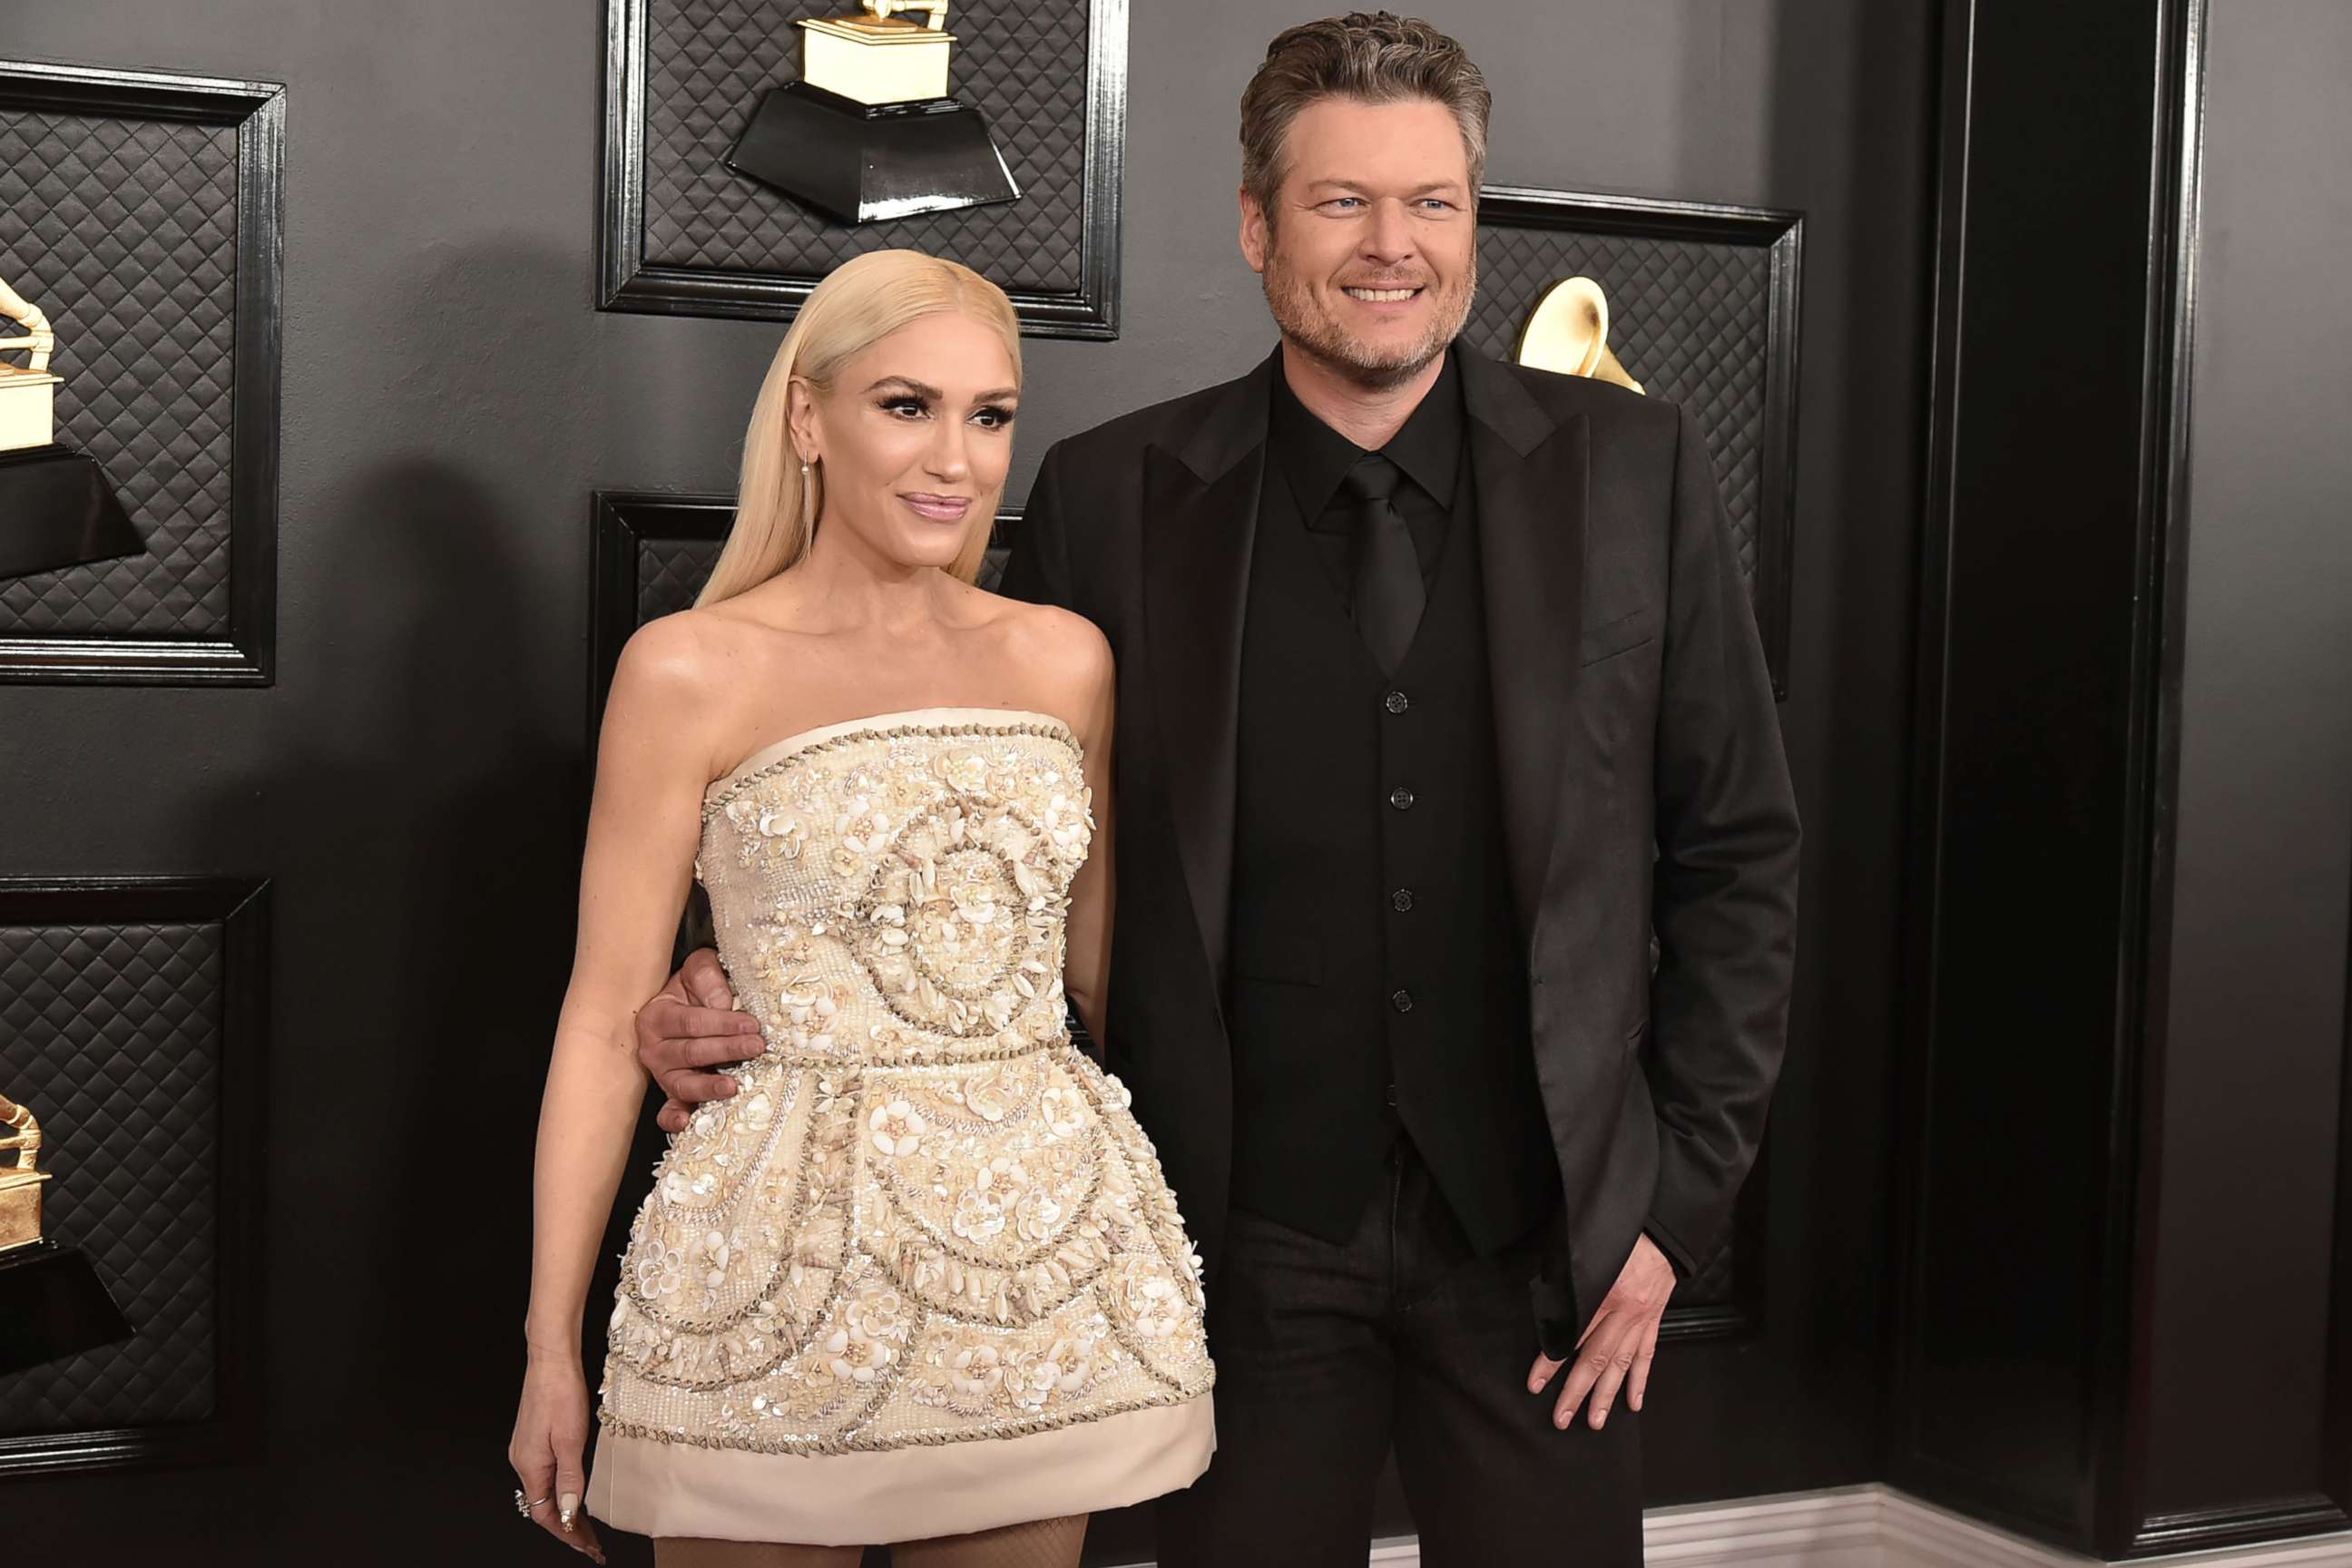 PHOTO: Gwen Stefani and Blake Shelton attend the 62nd Annual Grammy Awards at Staples Center, Jan. 26, 2020, in Los Angeles.